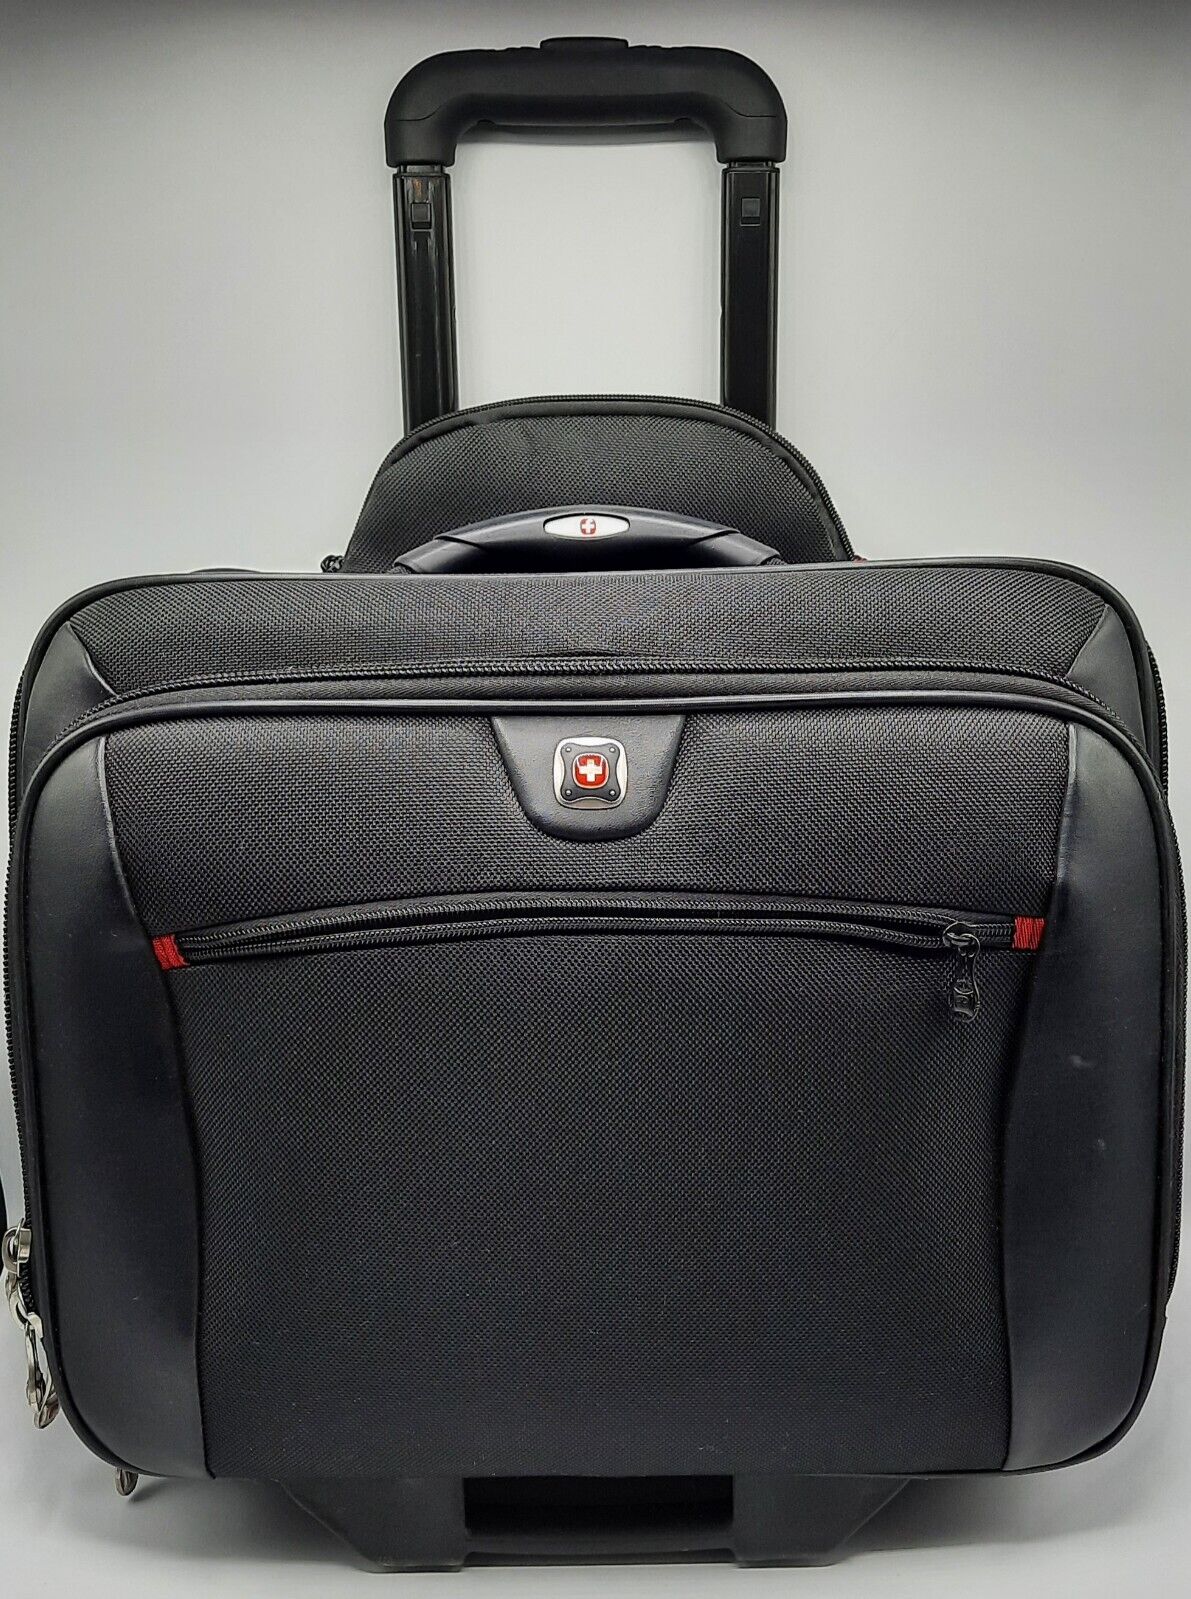 WENGER Swiss Gear Black Rolling Carry-On Computer Laptop Briefcase